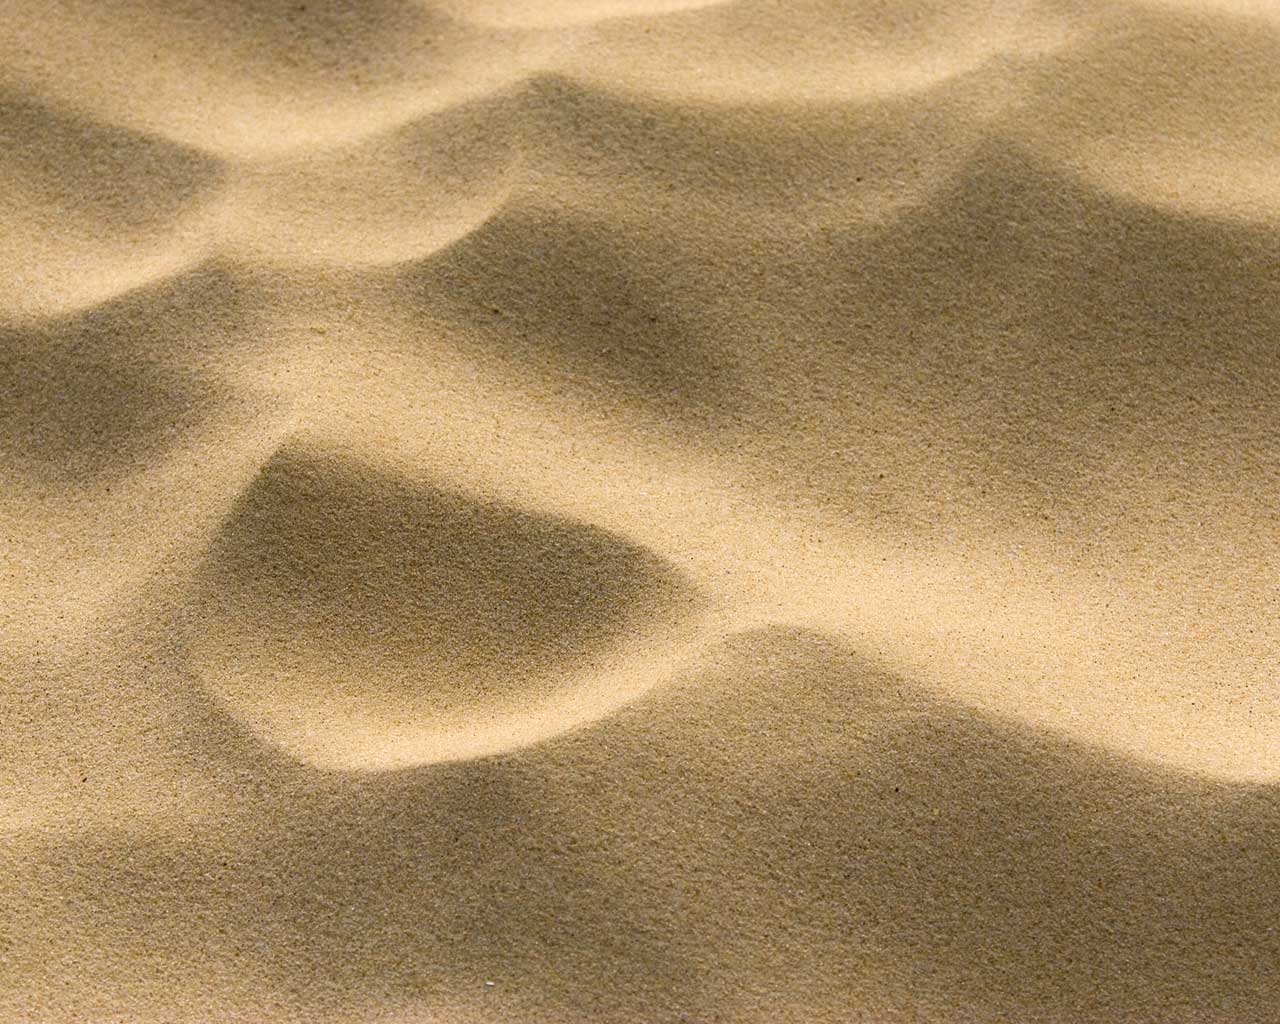 Sand pictures